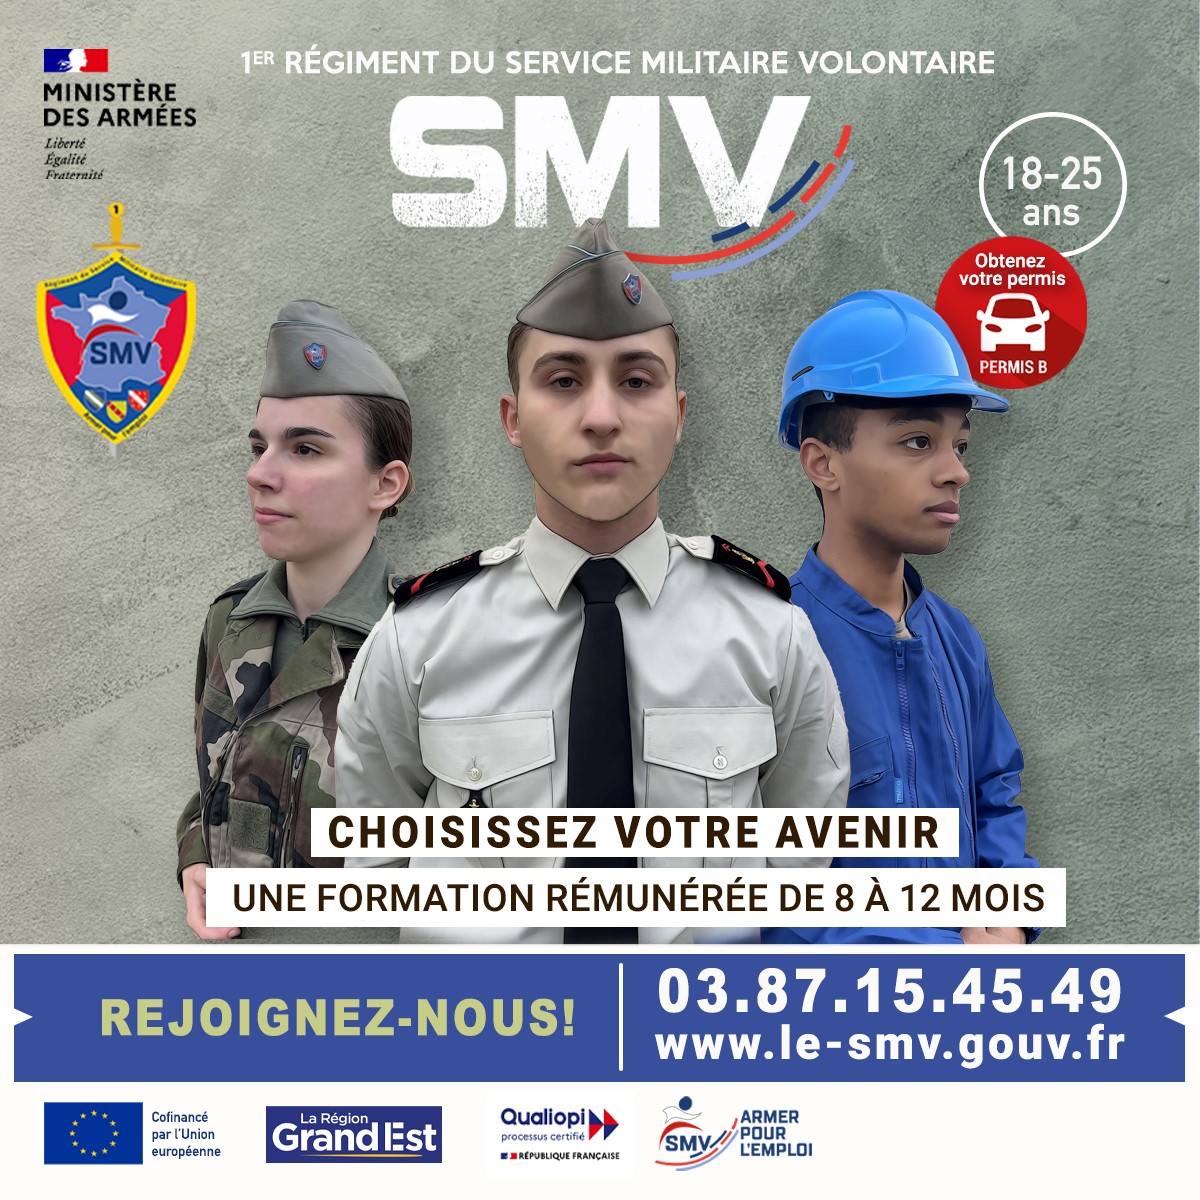 You are currently viewing Dispositif du service militaire volontaire !